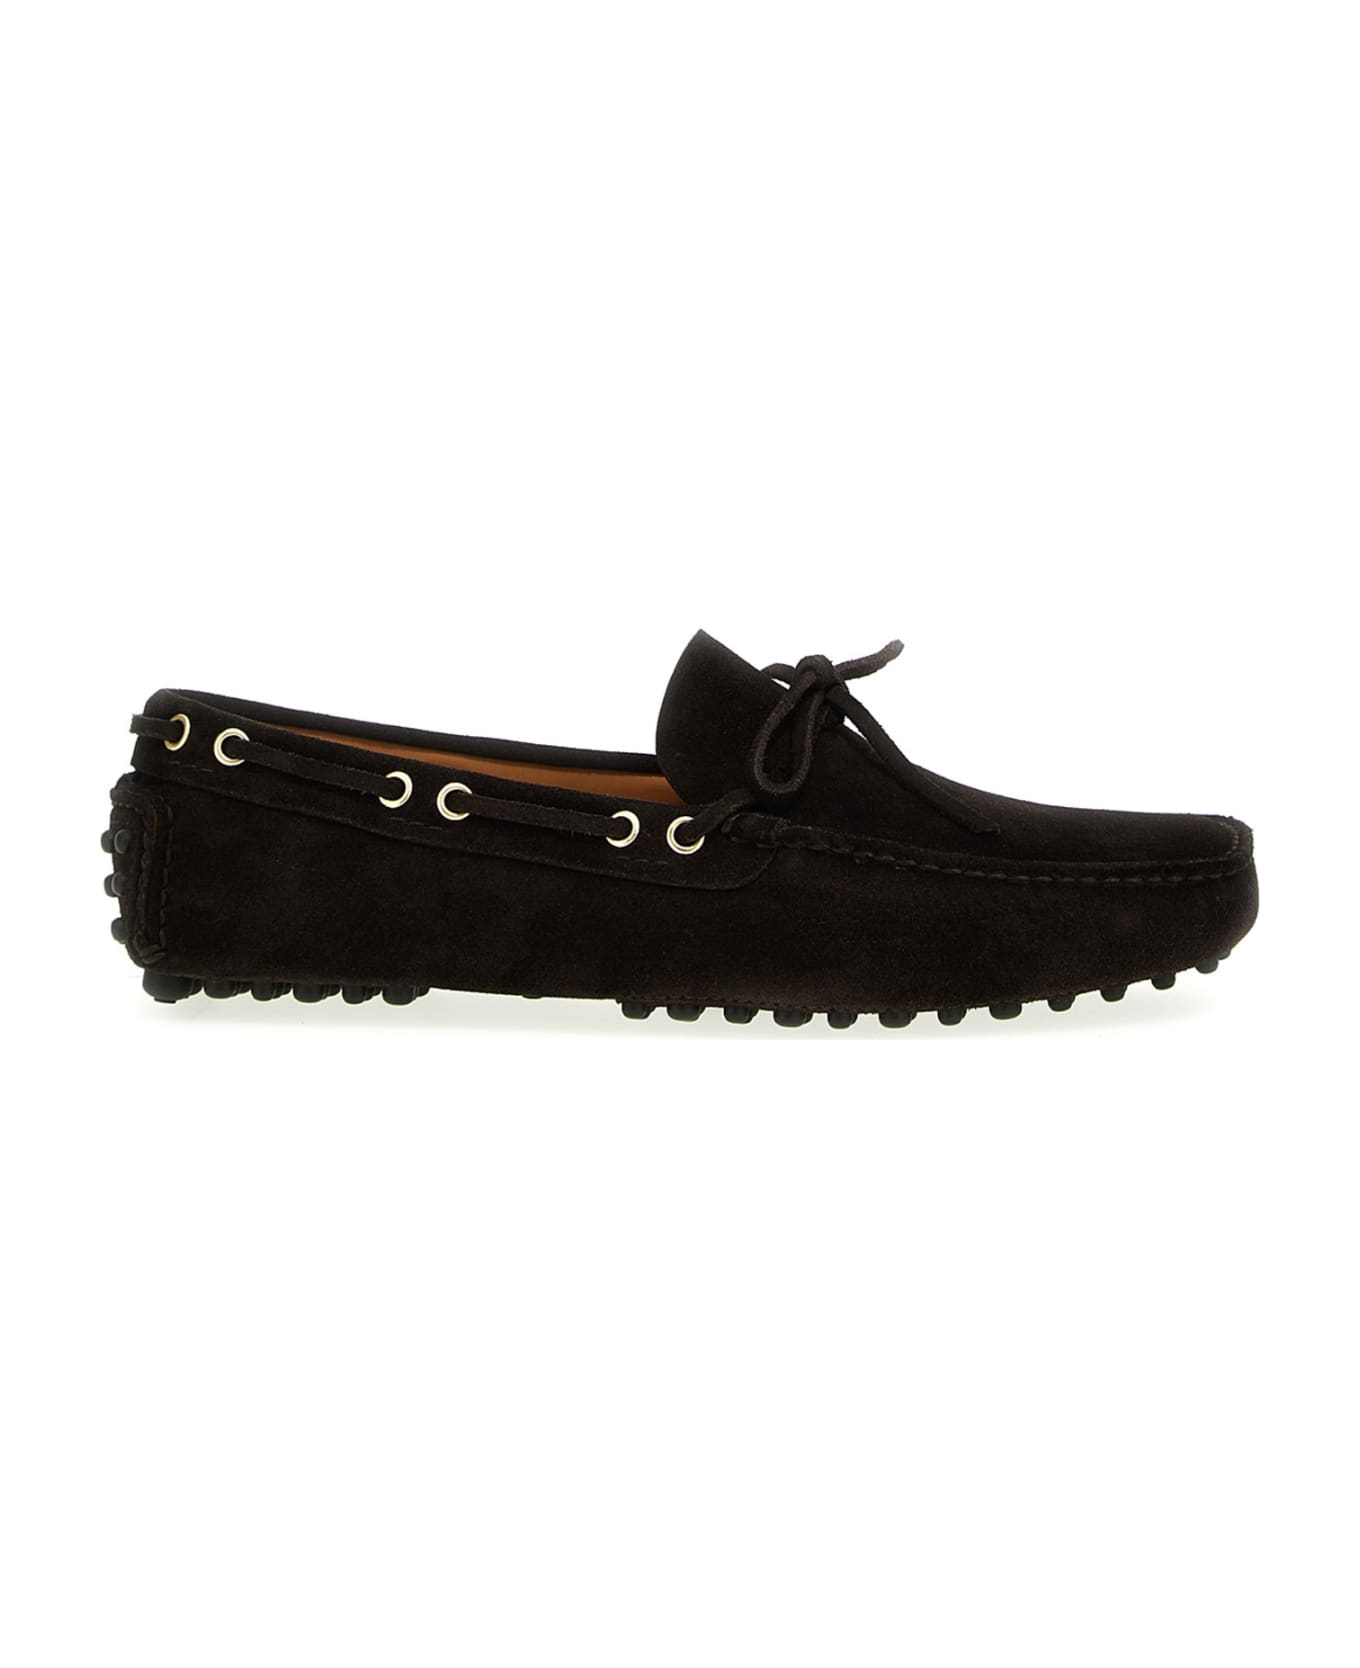 Car Shoe Suede Loafers - Brown